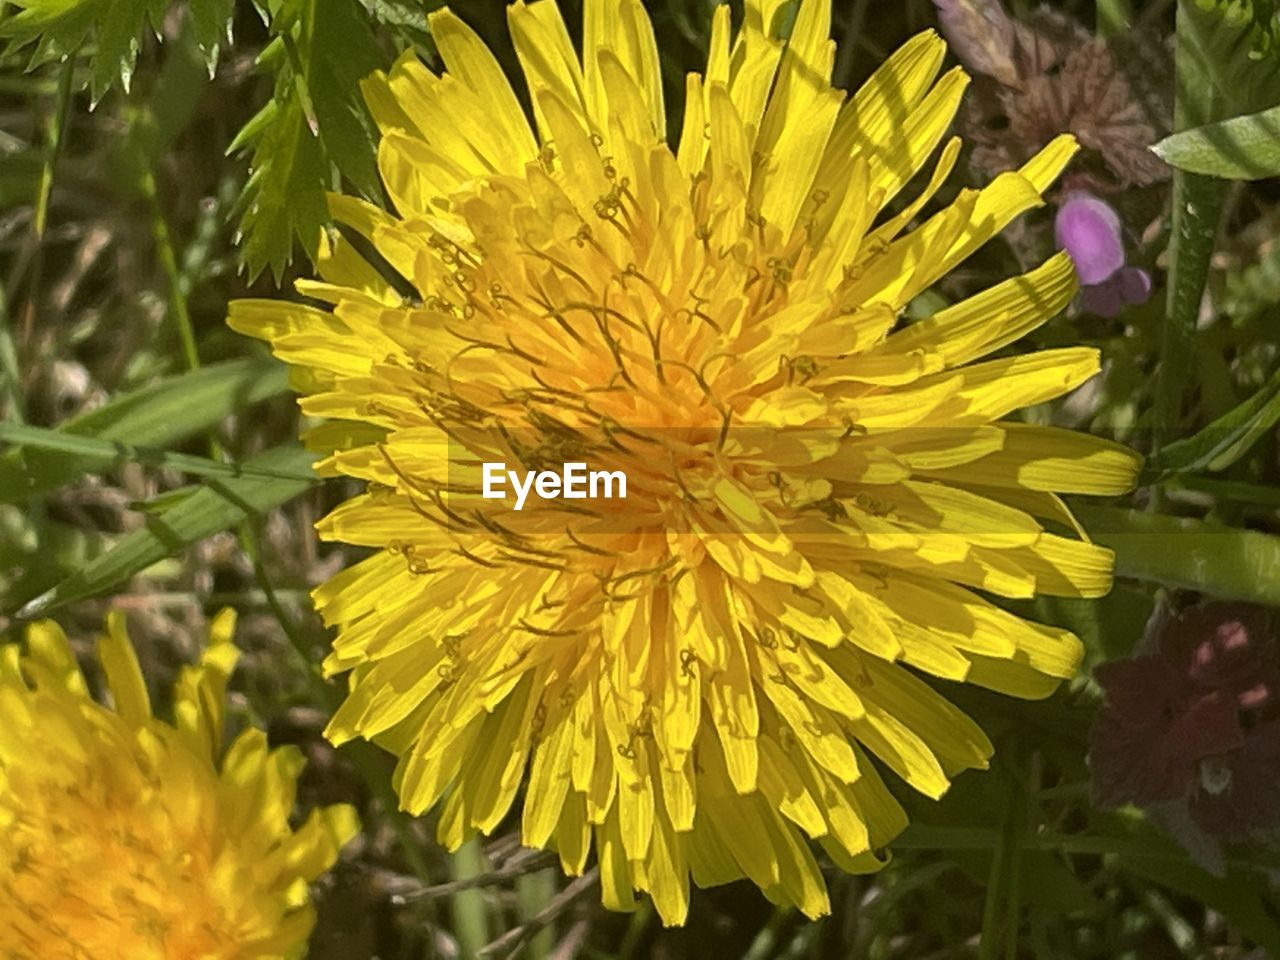 flower, flowering plant, plant, yellow, freshness, beauty in nature, flower head, growth, fragility, petal, inflorescence, close-up, nature, no people, outdoors, leaf, plant part, springtime, focus on foreground, day, dandelion, wildflower, green, vibrant color, sunlight, botany, blossom